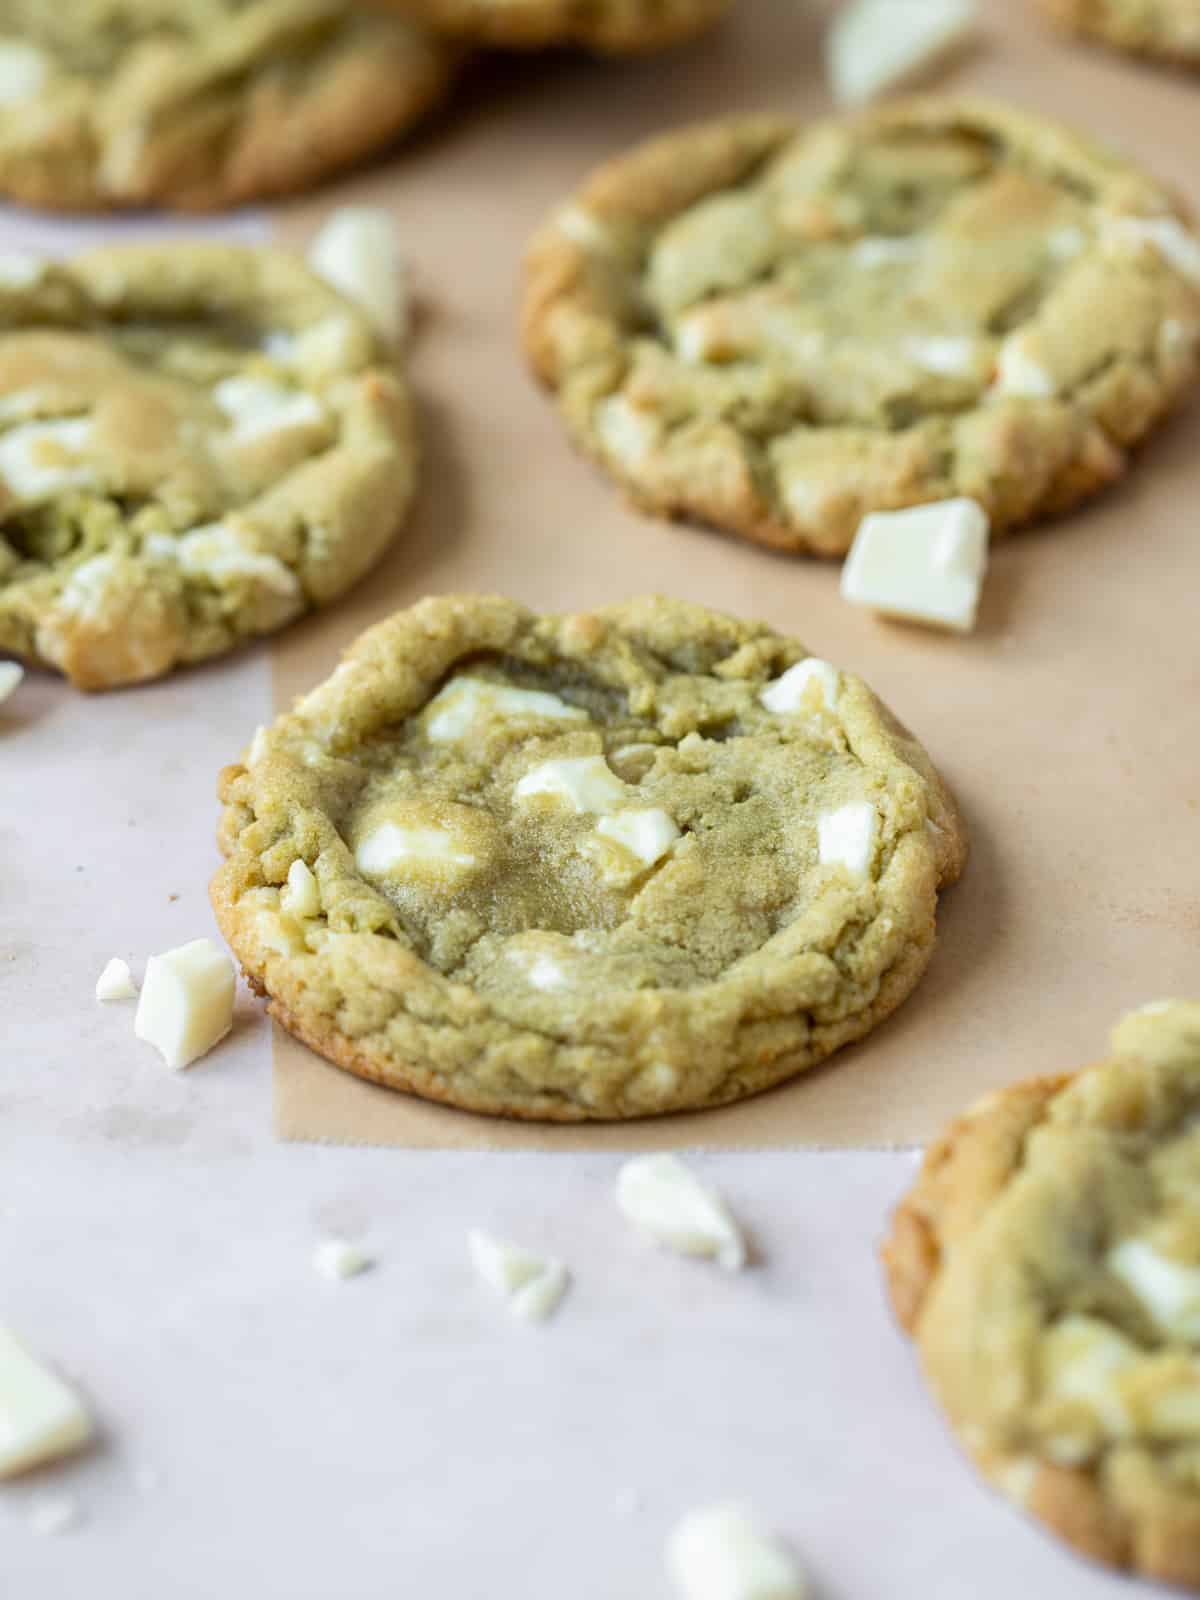 a close up of a matcha cookie surrounded by other cookies and chunks of white chocolate.